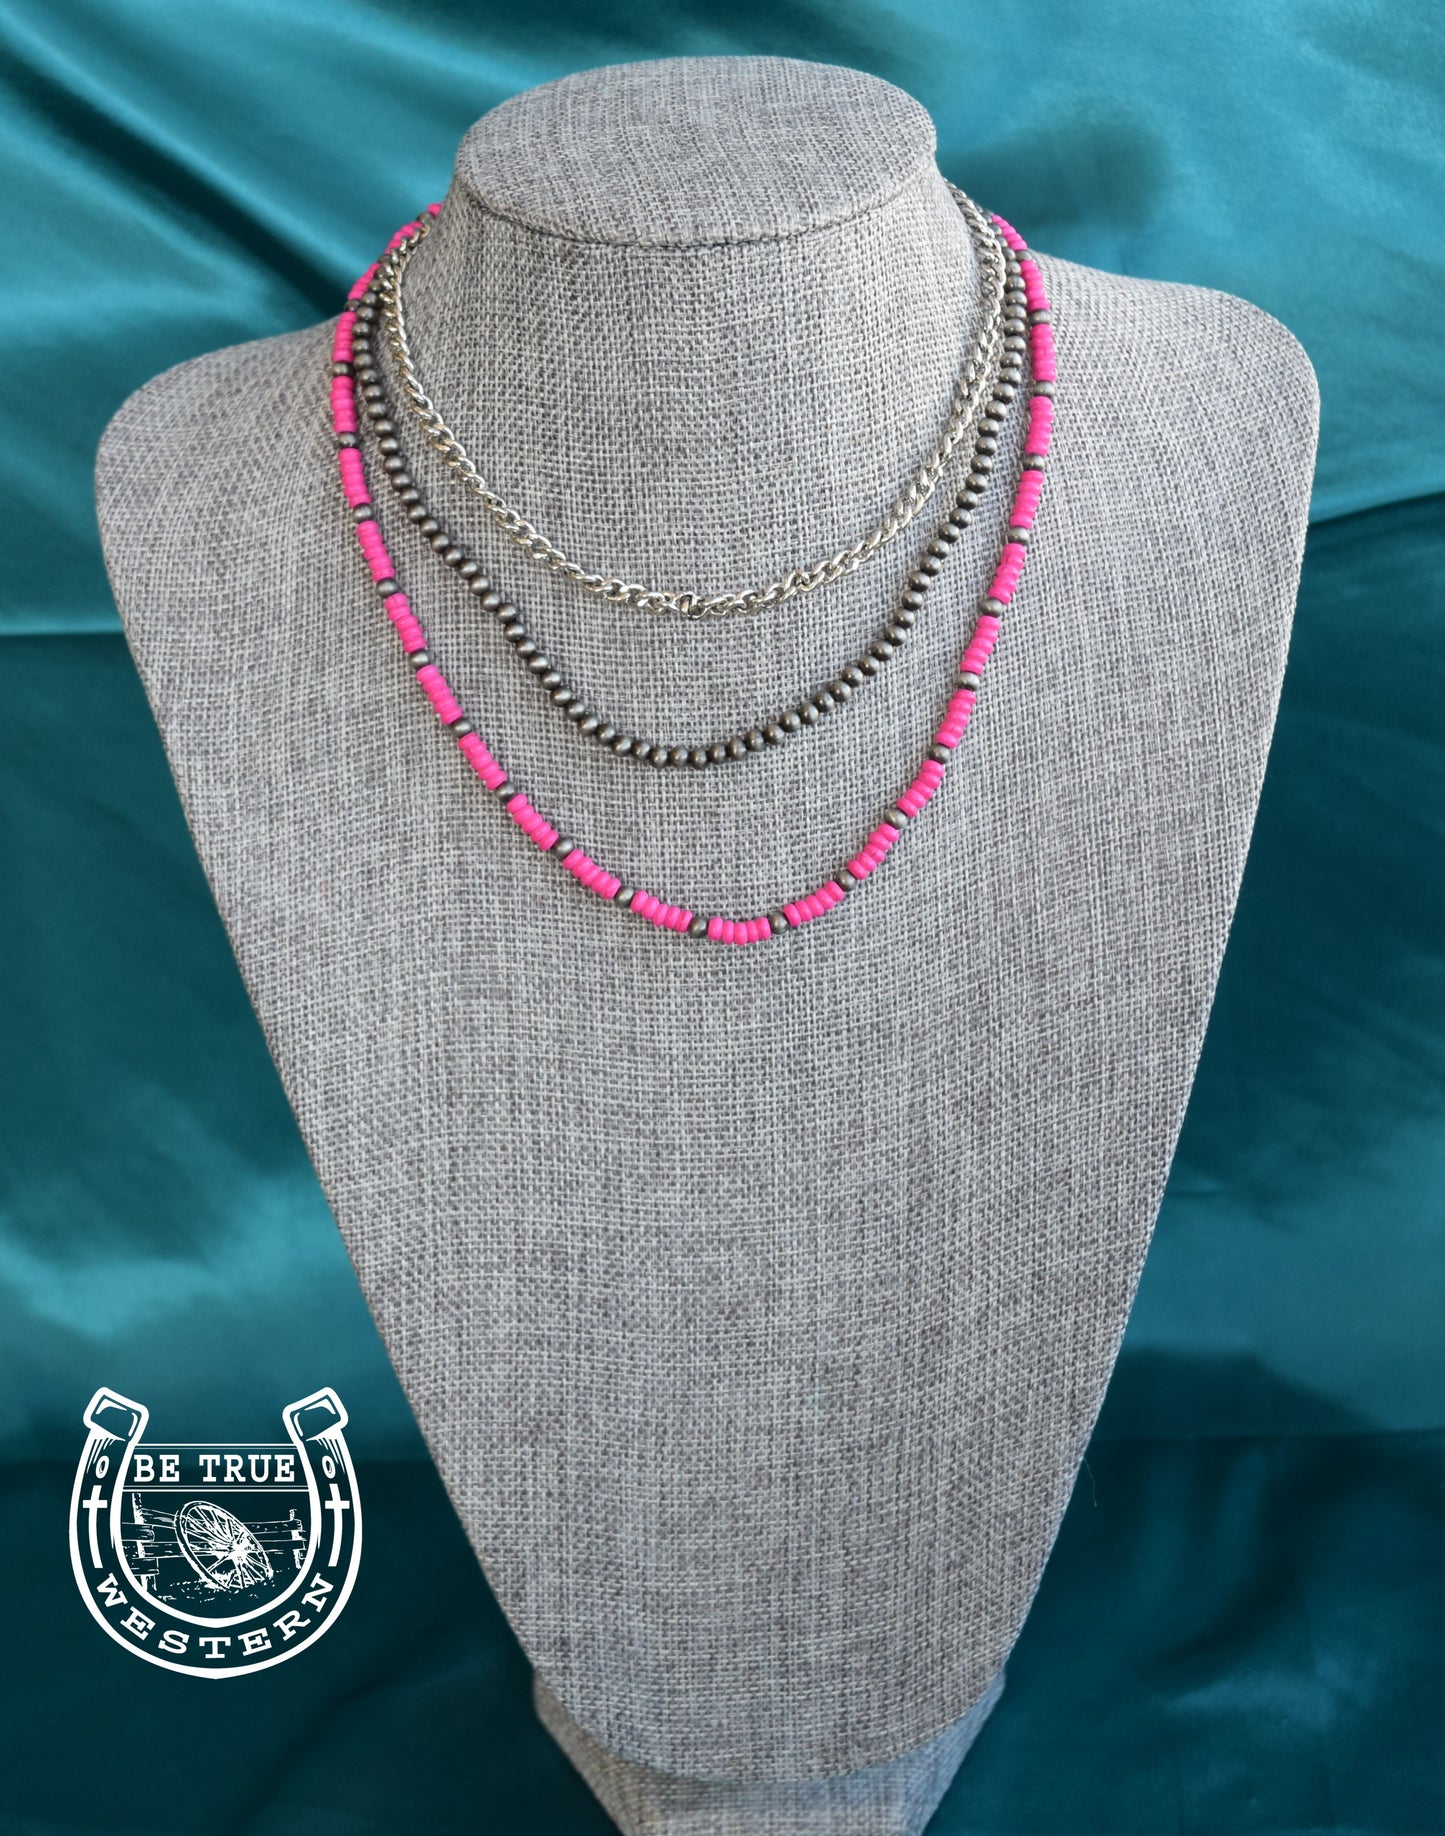 The Pink Outlaw Navajo Choker Stacker Necklace